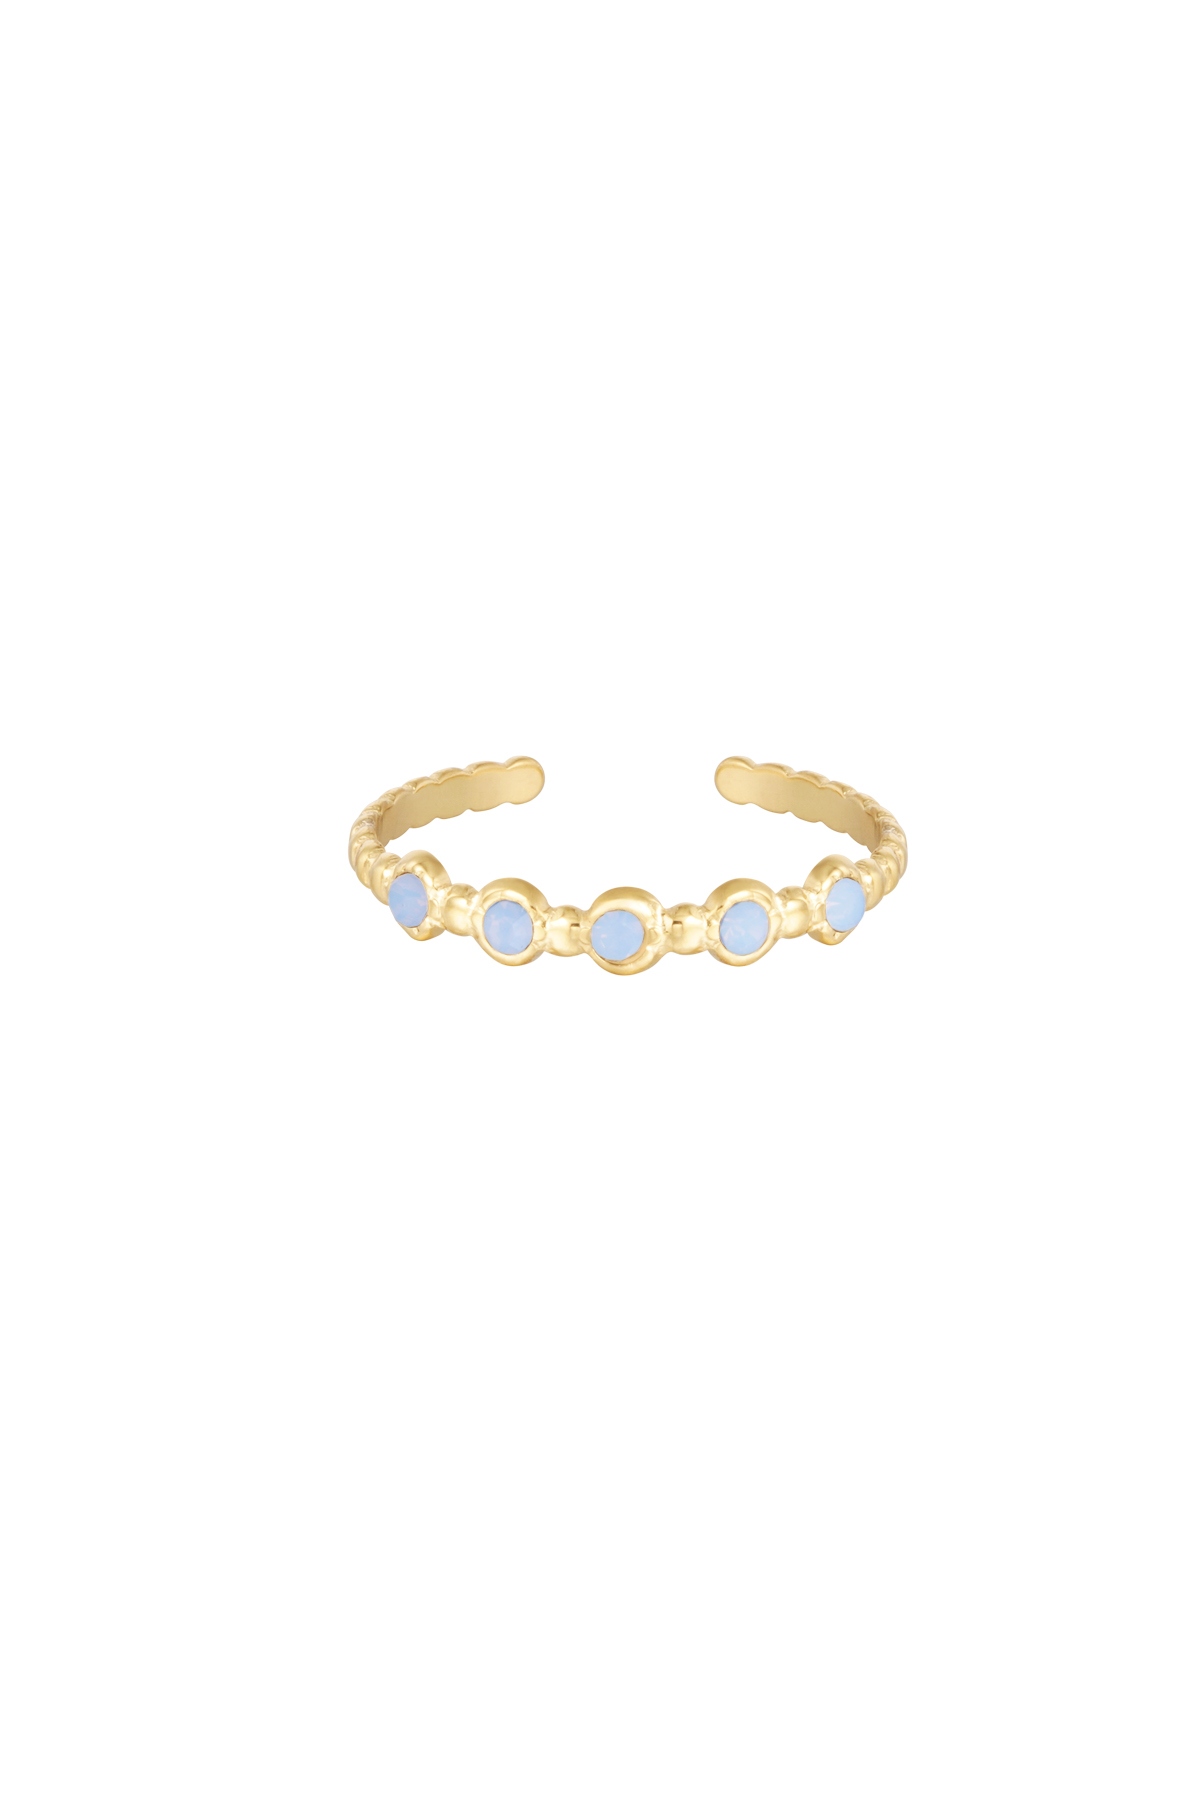 Ring stones - gold/blue h5 